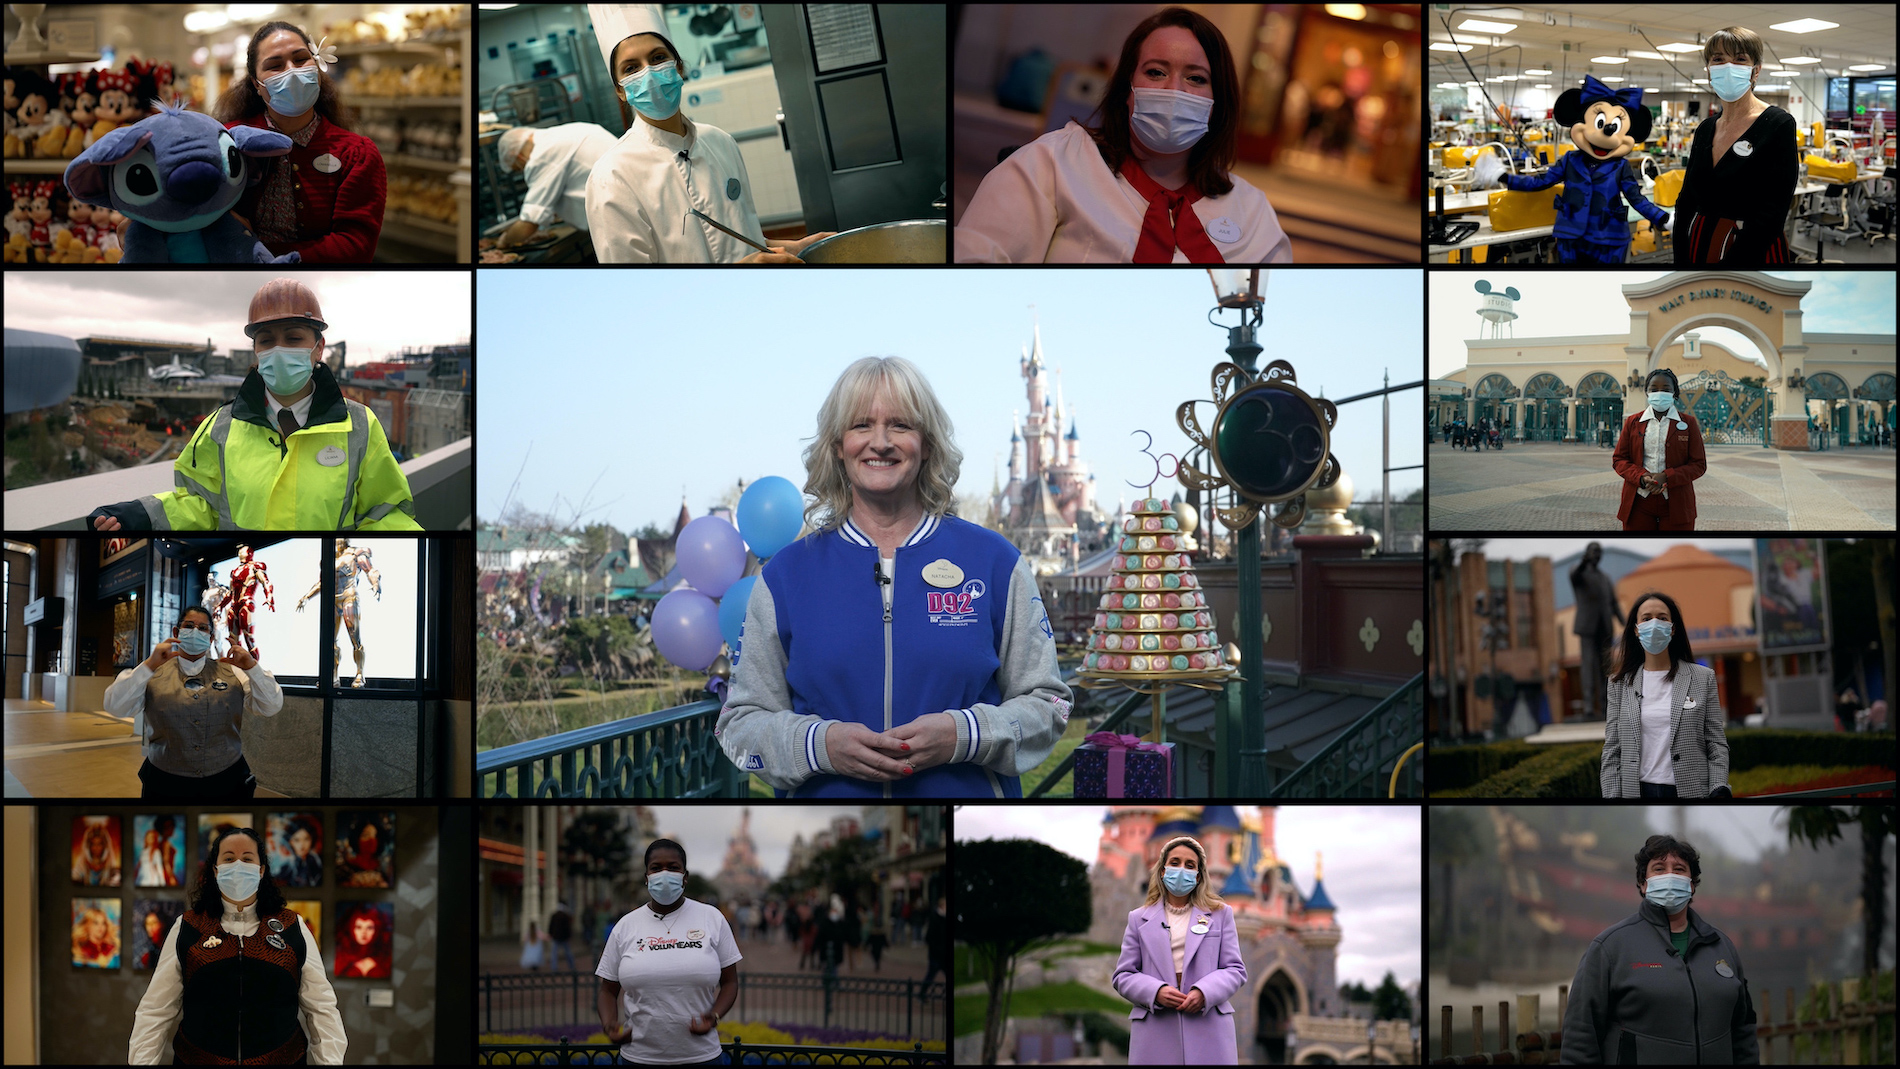 Disneyland Paris Celebrates International Women’s Day as Part of Commitment to Professional Equality